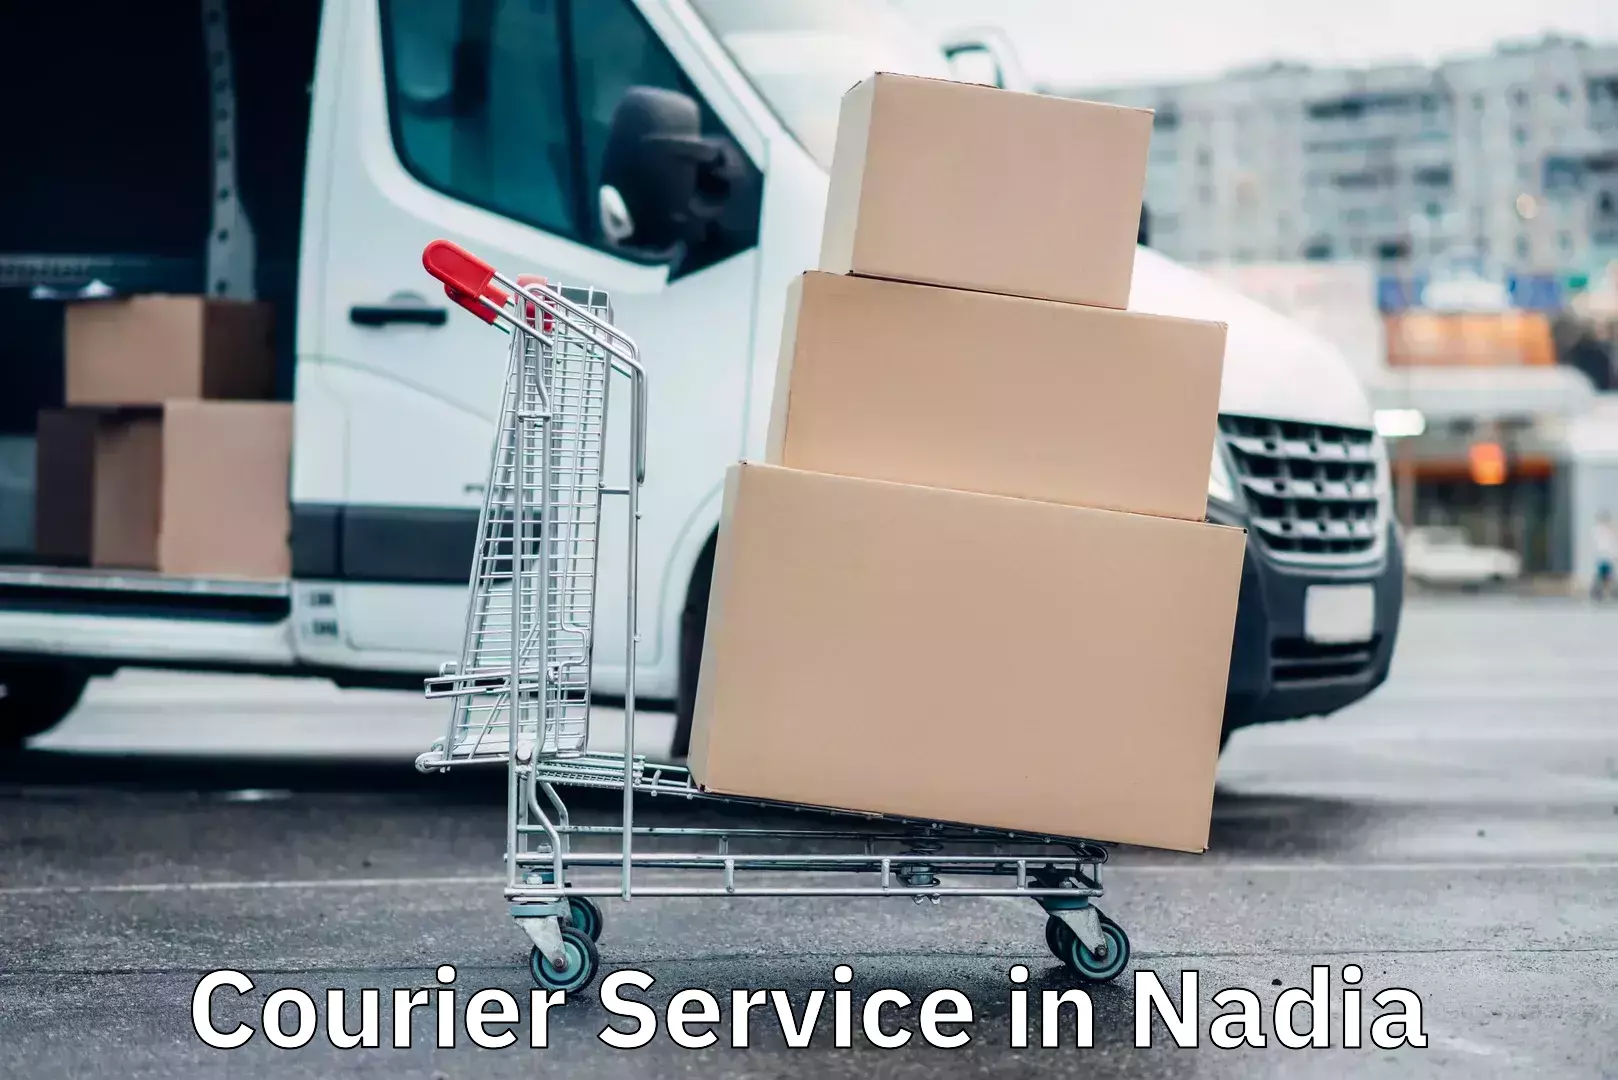 Quality courier services in Nadia